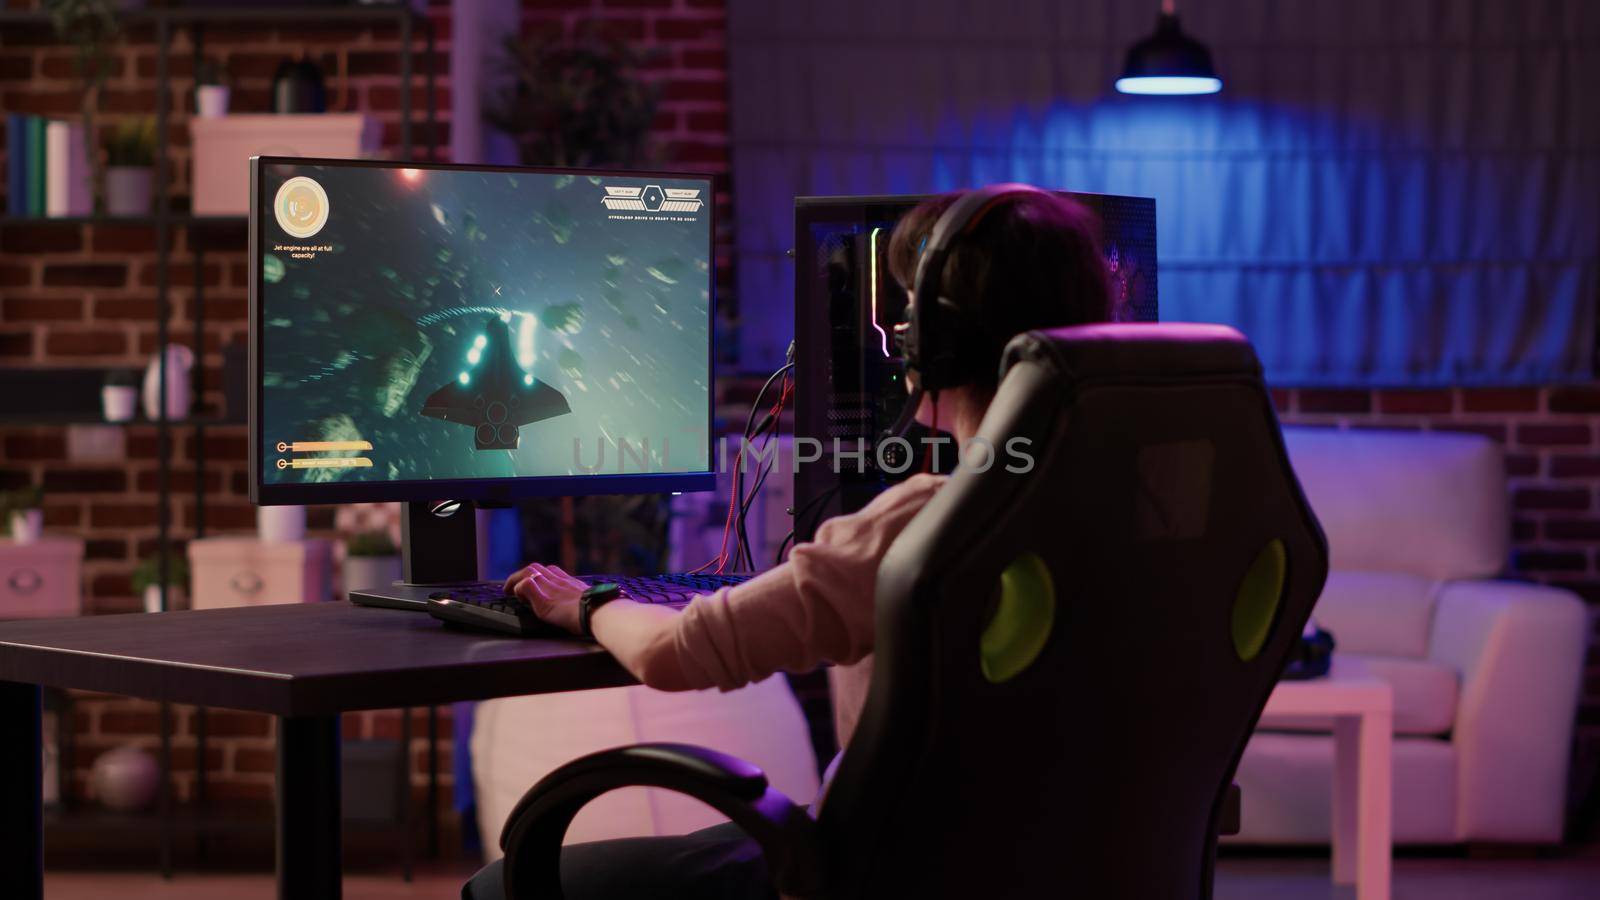 Over shoulder view of gamer girl relaxing and streaming on internet fast paced space shooter simulation gameplay while talking using headset. Woman playing rpg action game on professional pc setup.